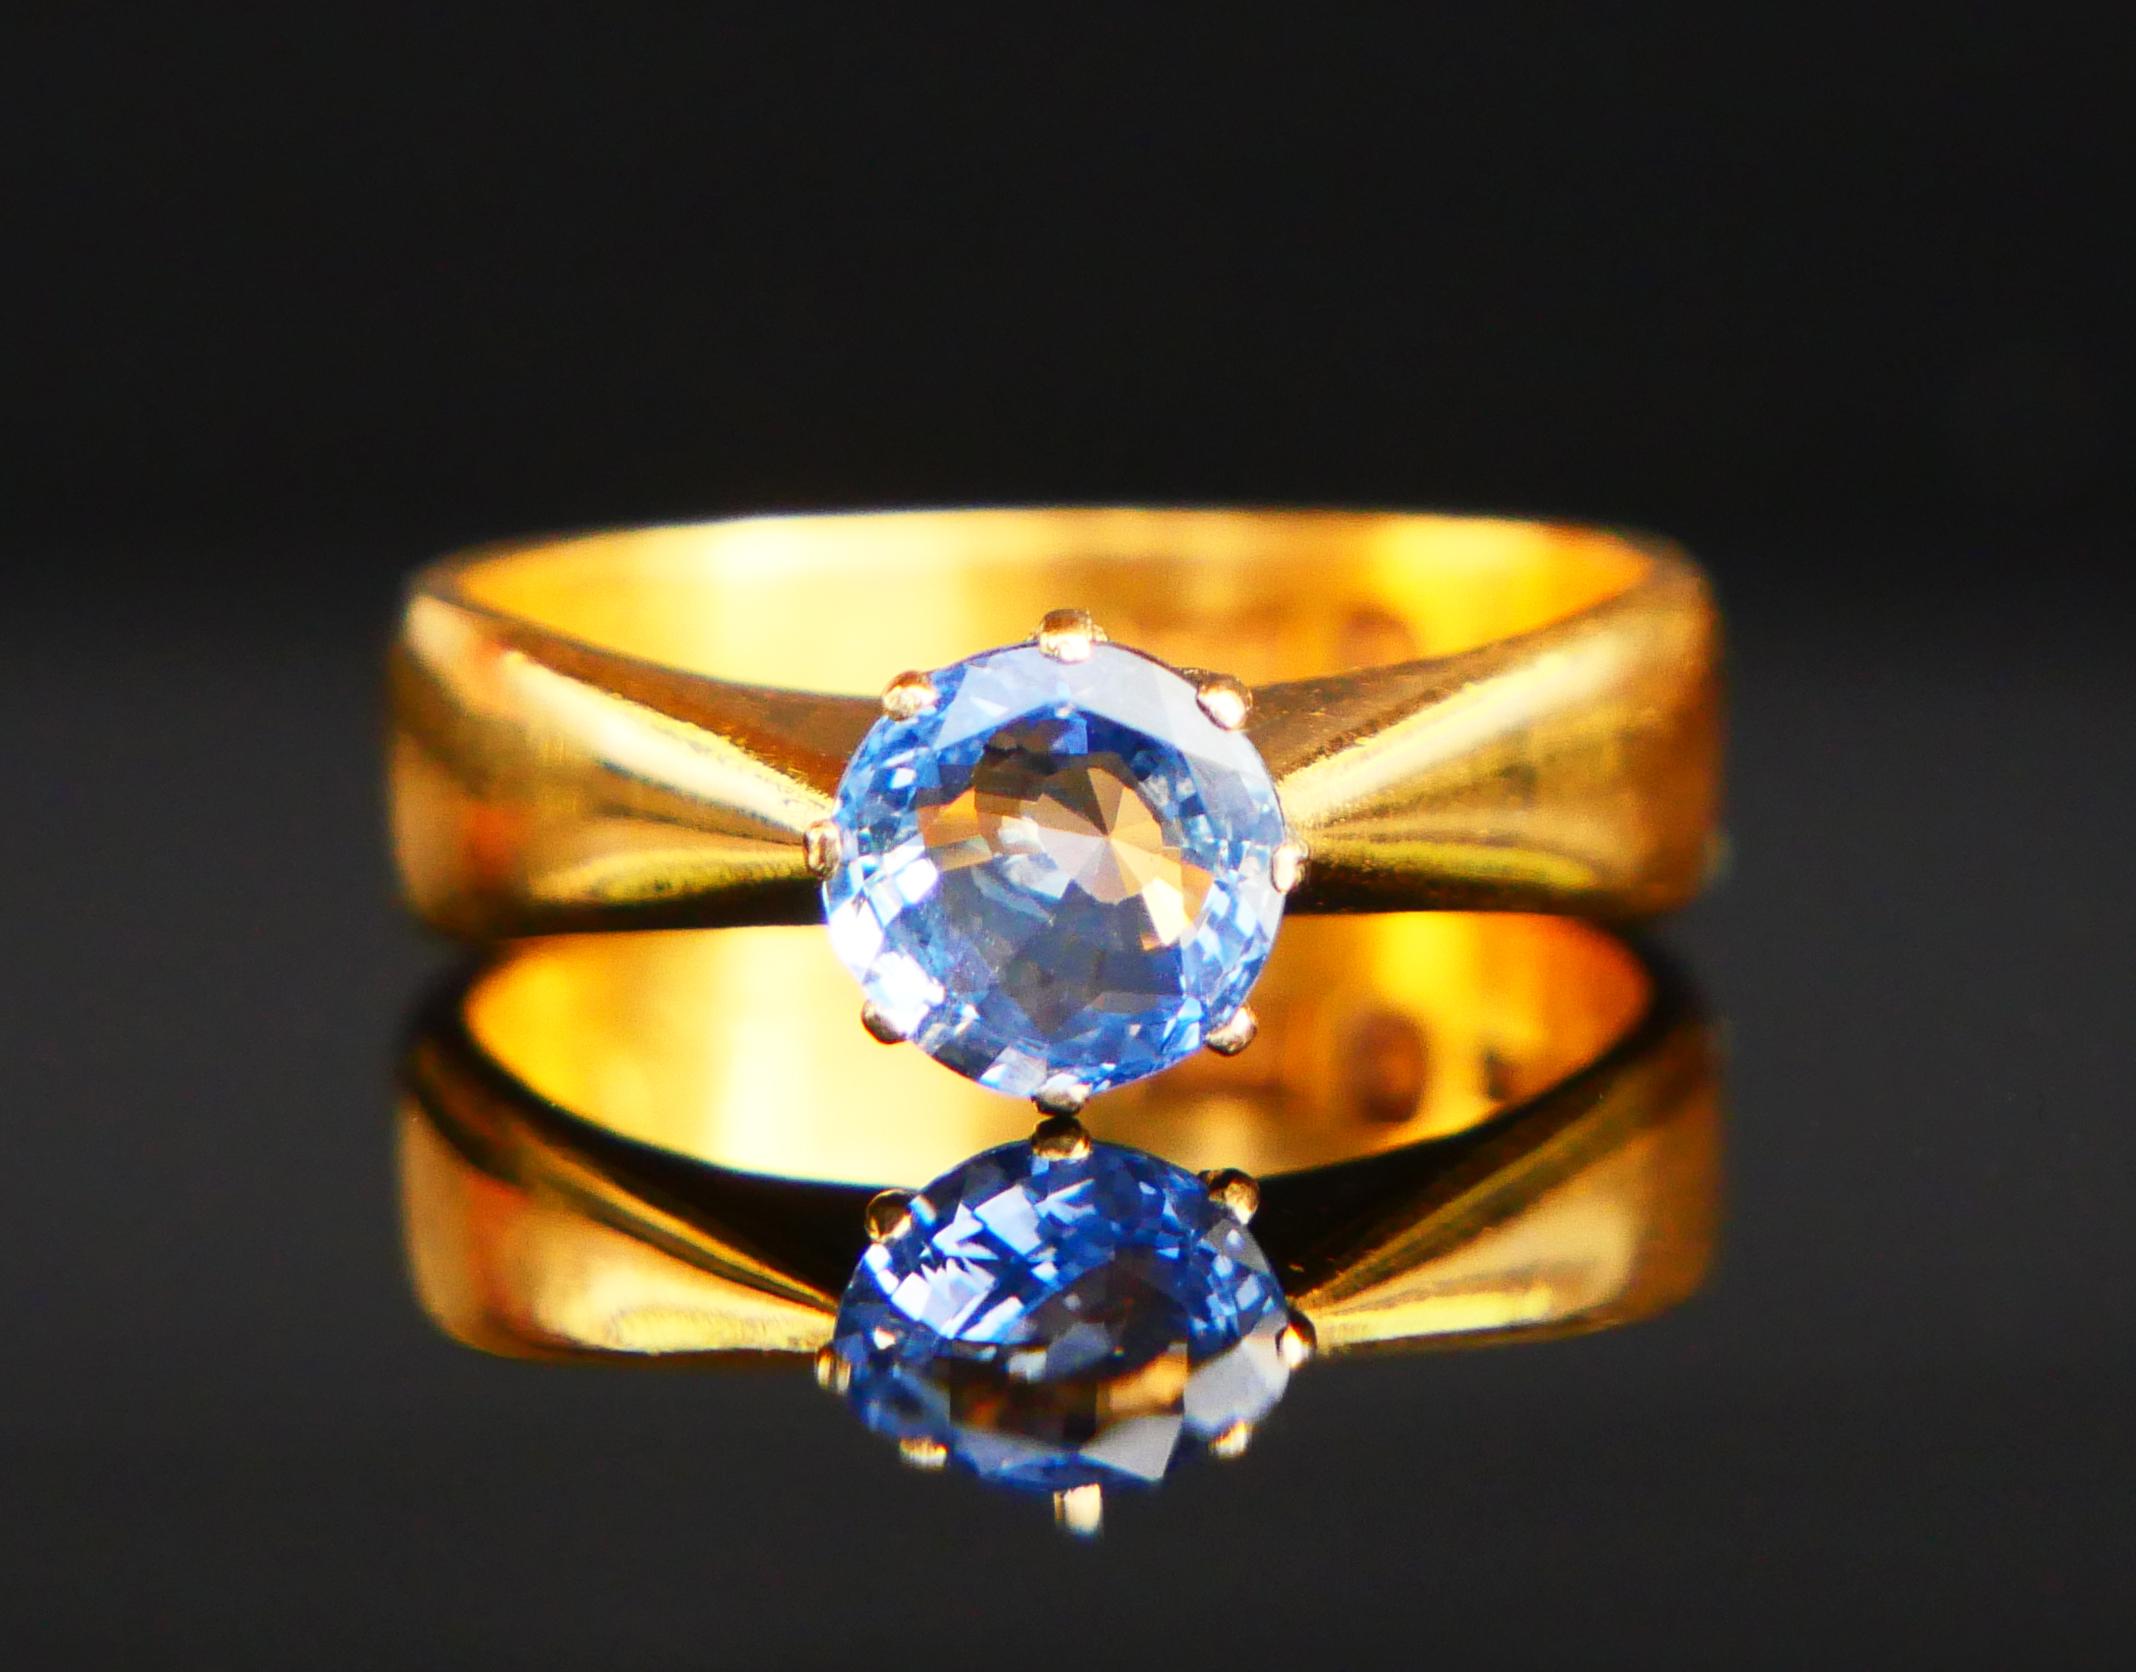 Elegant 120 Years old 23K Gold and Blue Ceylon Sapphire Ring.

Wide Band 5 mm at widest in solid 23ct Gold + claw set natural old diamond hand-cut natural Ceylon Sapphire of light Blue or Cornflower color Ø 6.5 mm x 3 mm deep / ca. 1.25 ct.